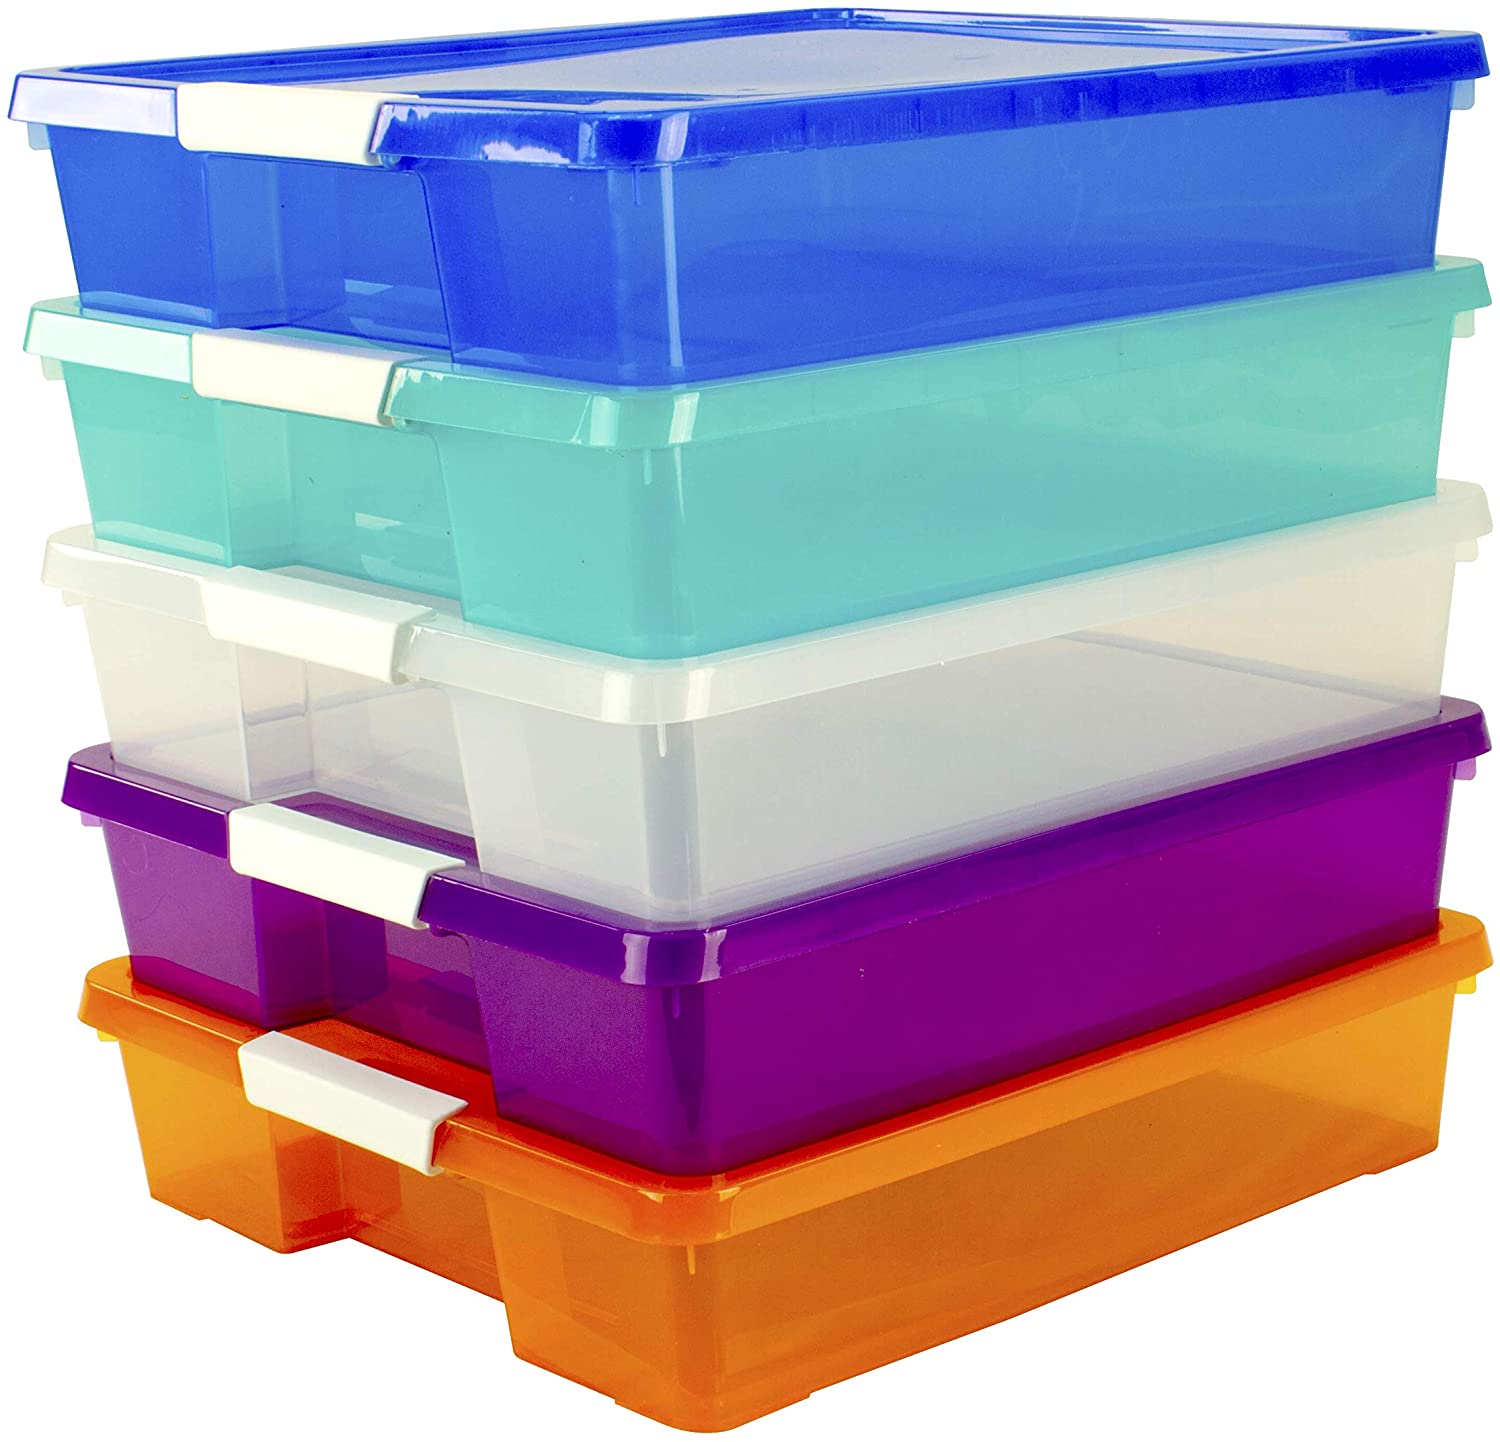 Rainbow-colored, plastic storage containers